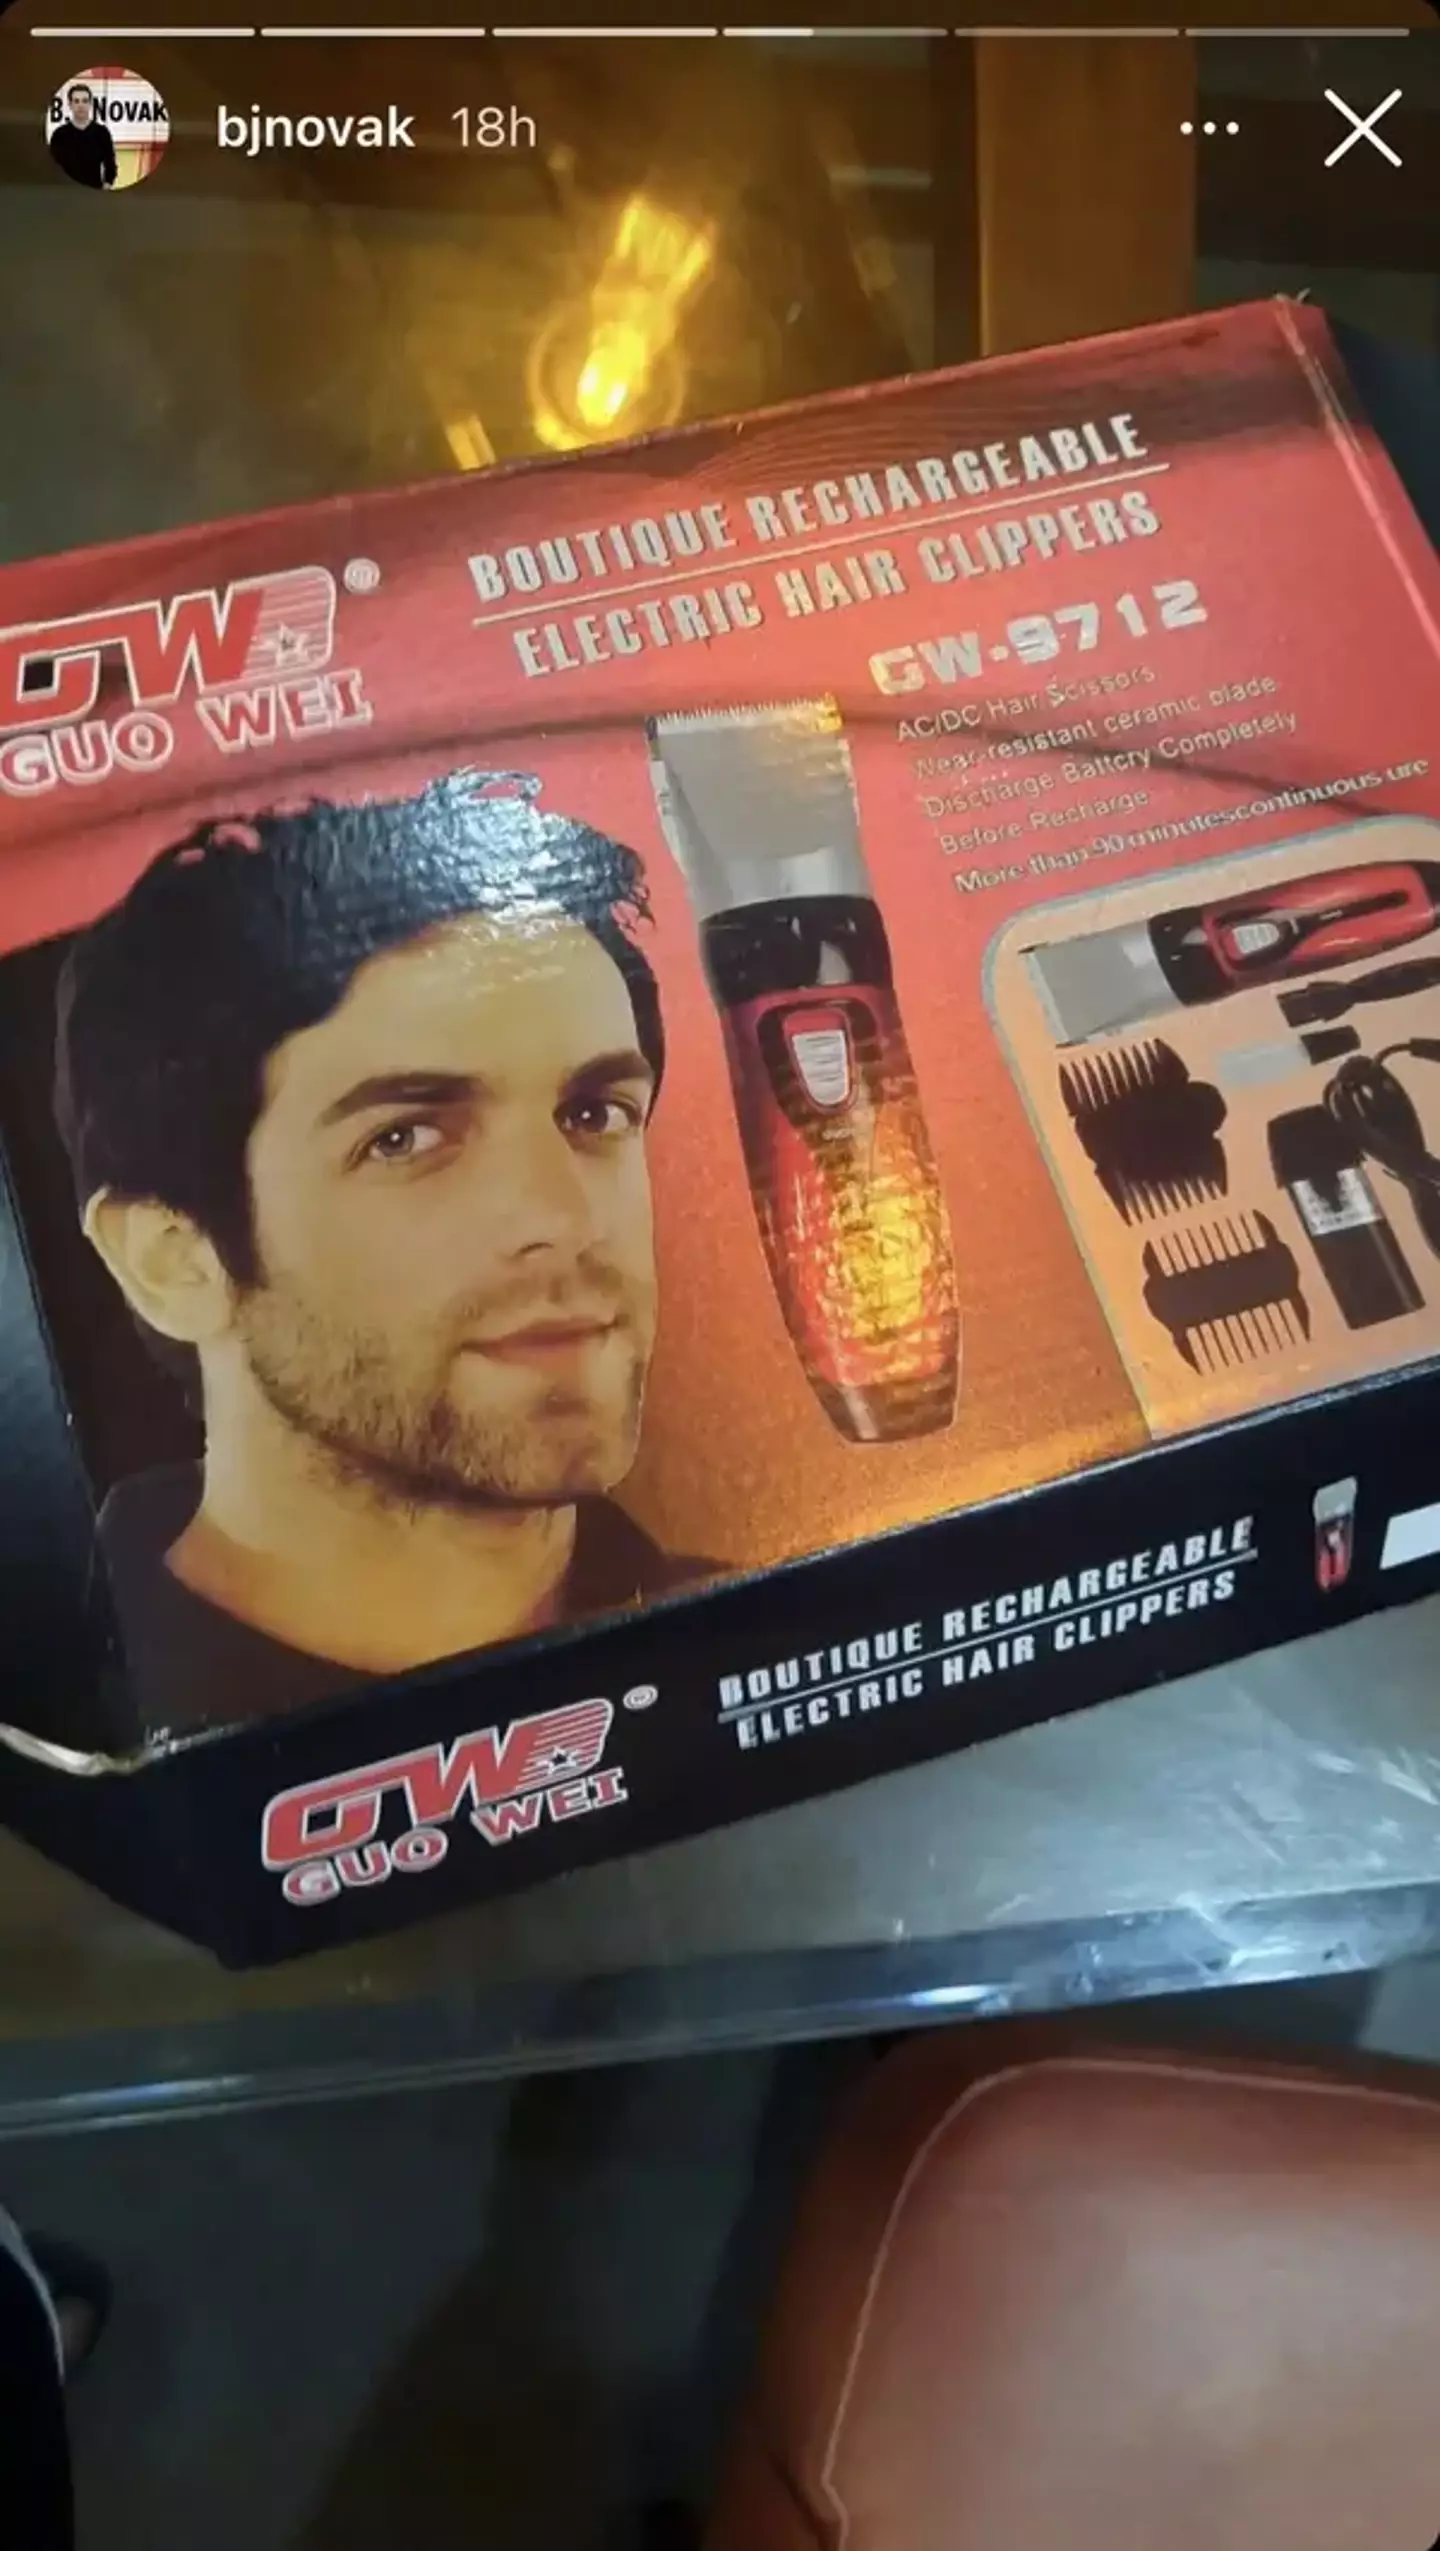 Need a face for your Chinese hair trimmer, why not BJ Novak?